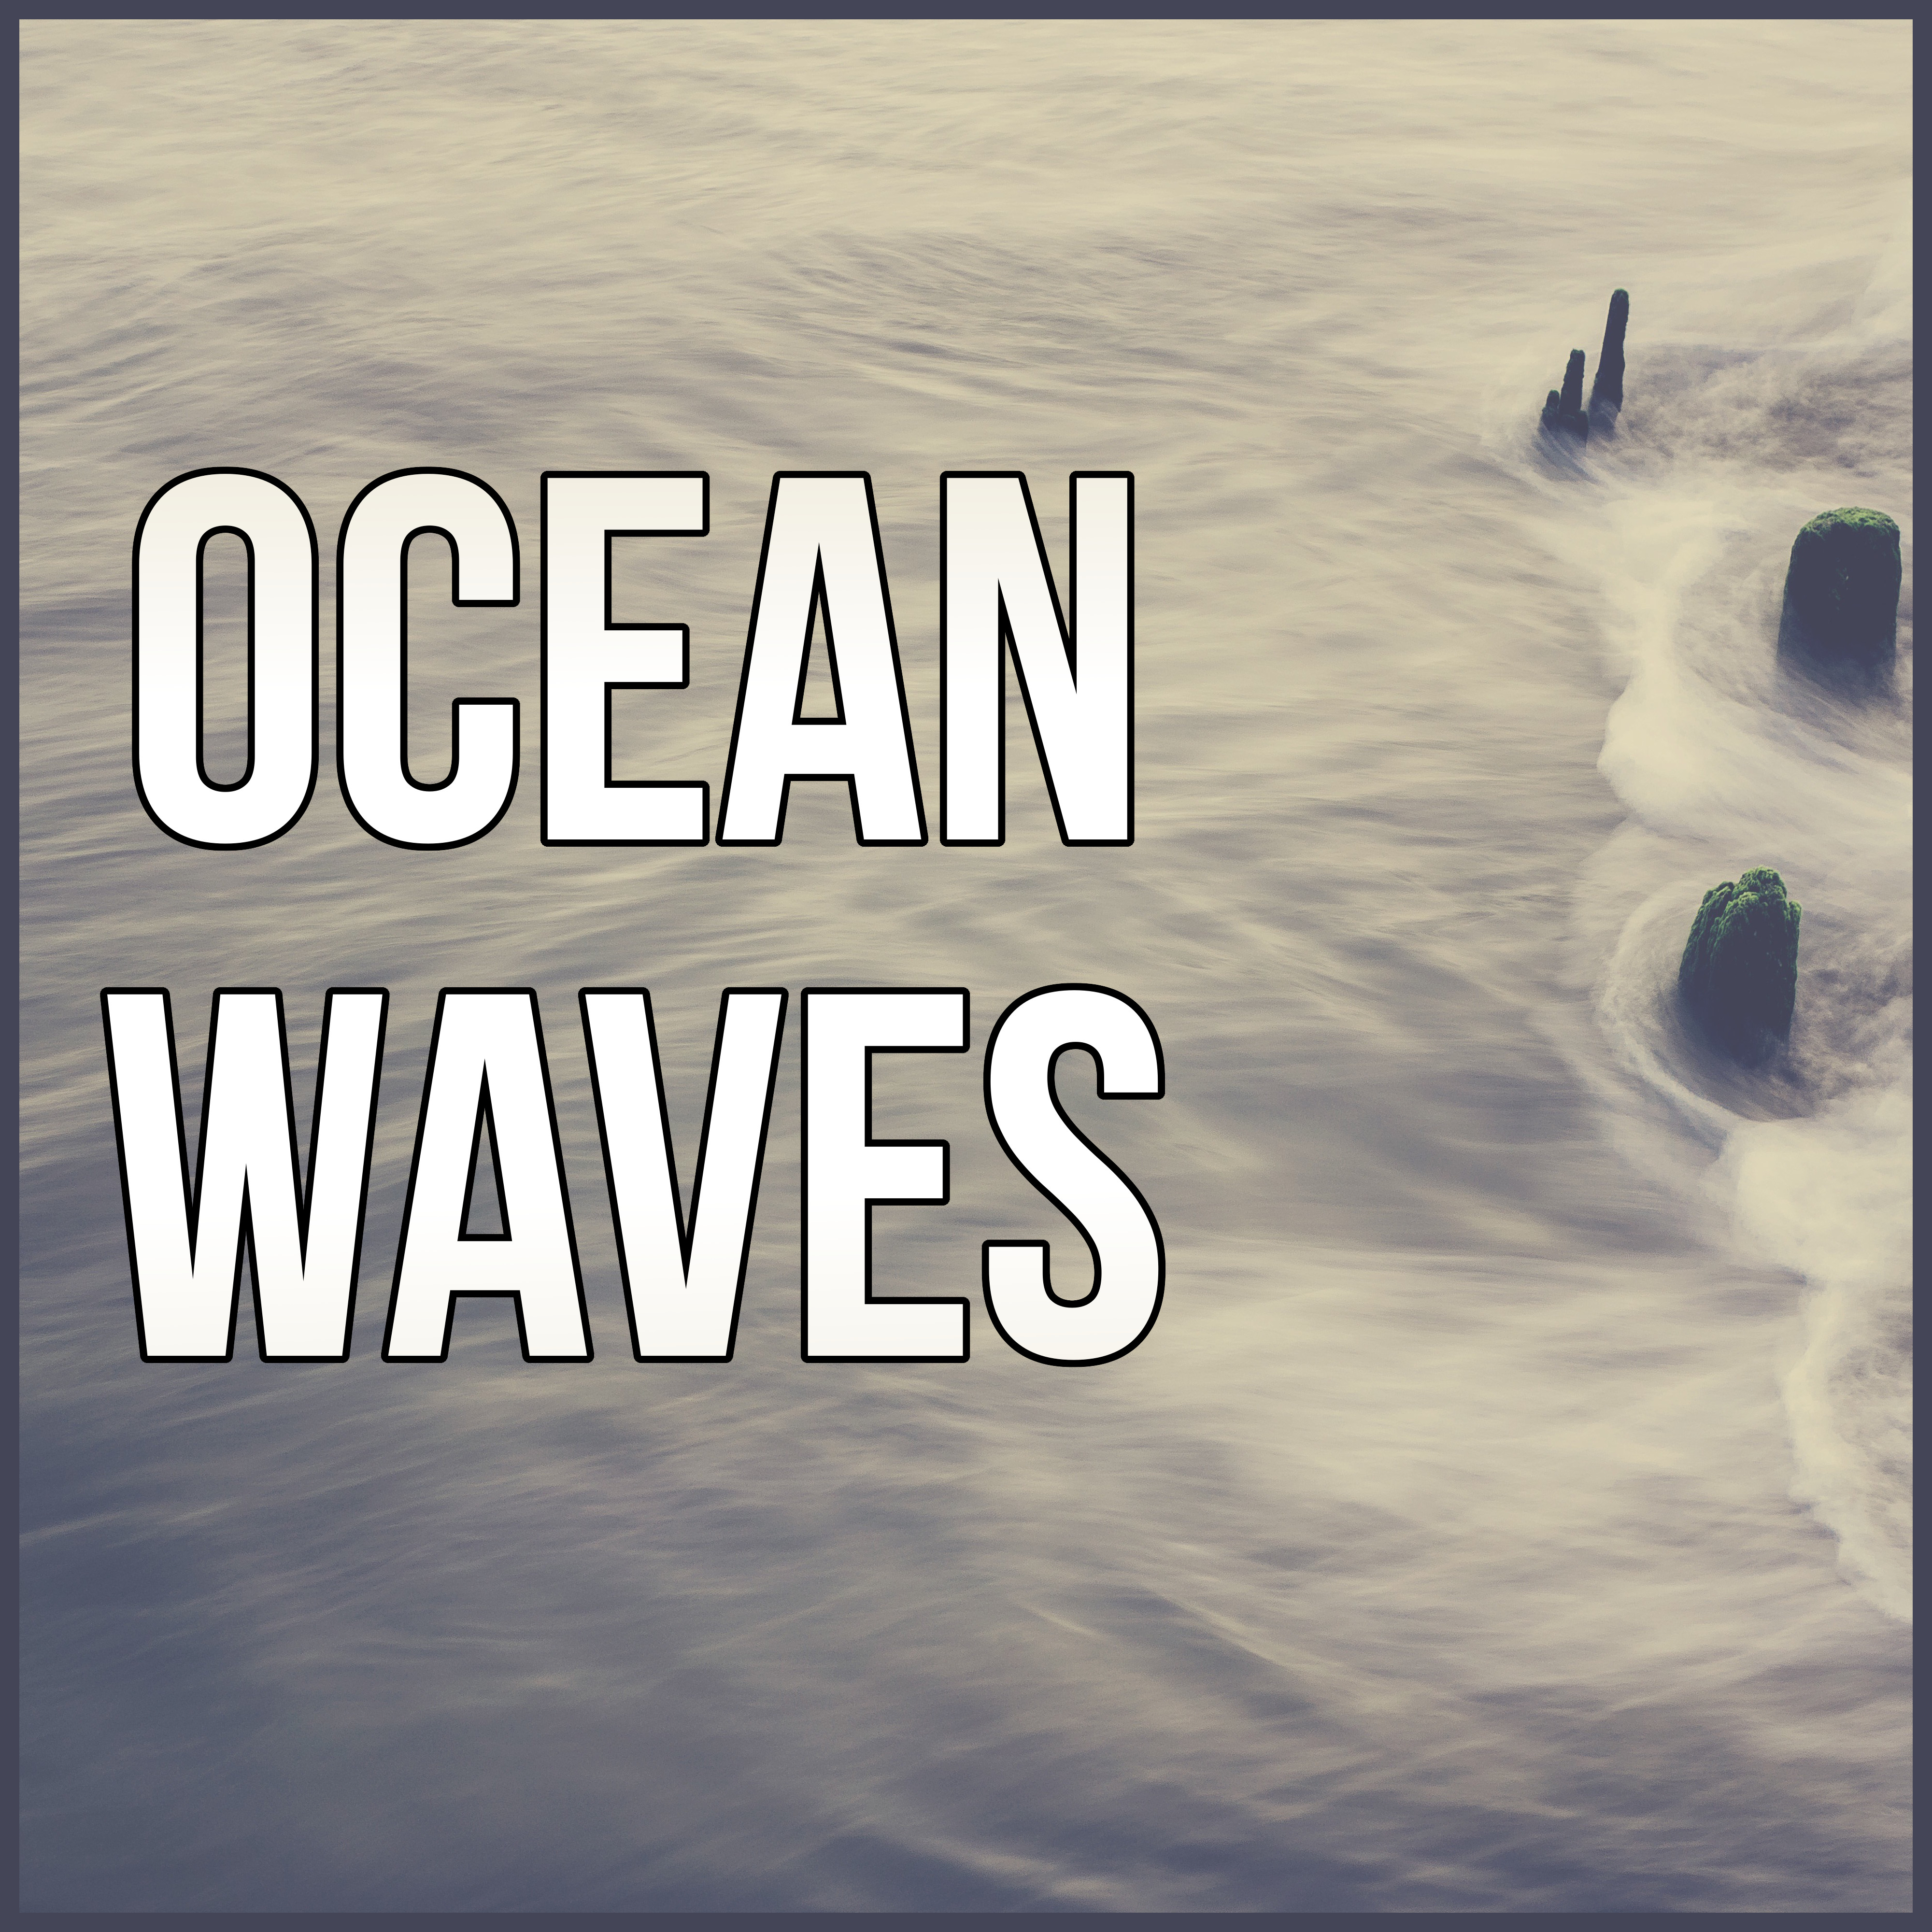 Ocean Waves - Natural White Noise and Sounds of Nature for Deep Sleep, Healing Massage, Restful Sleep